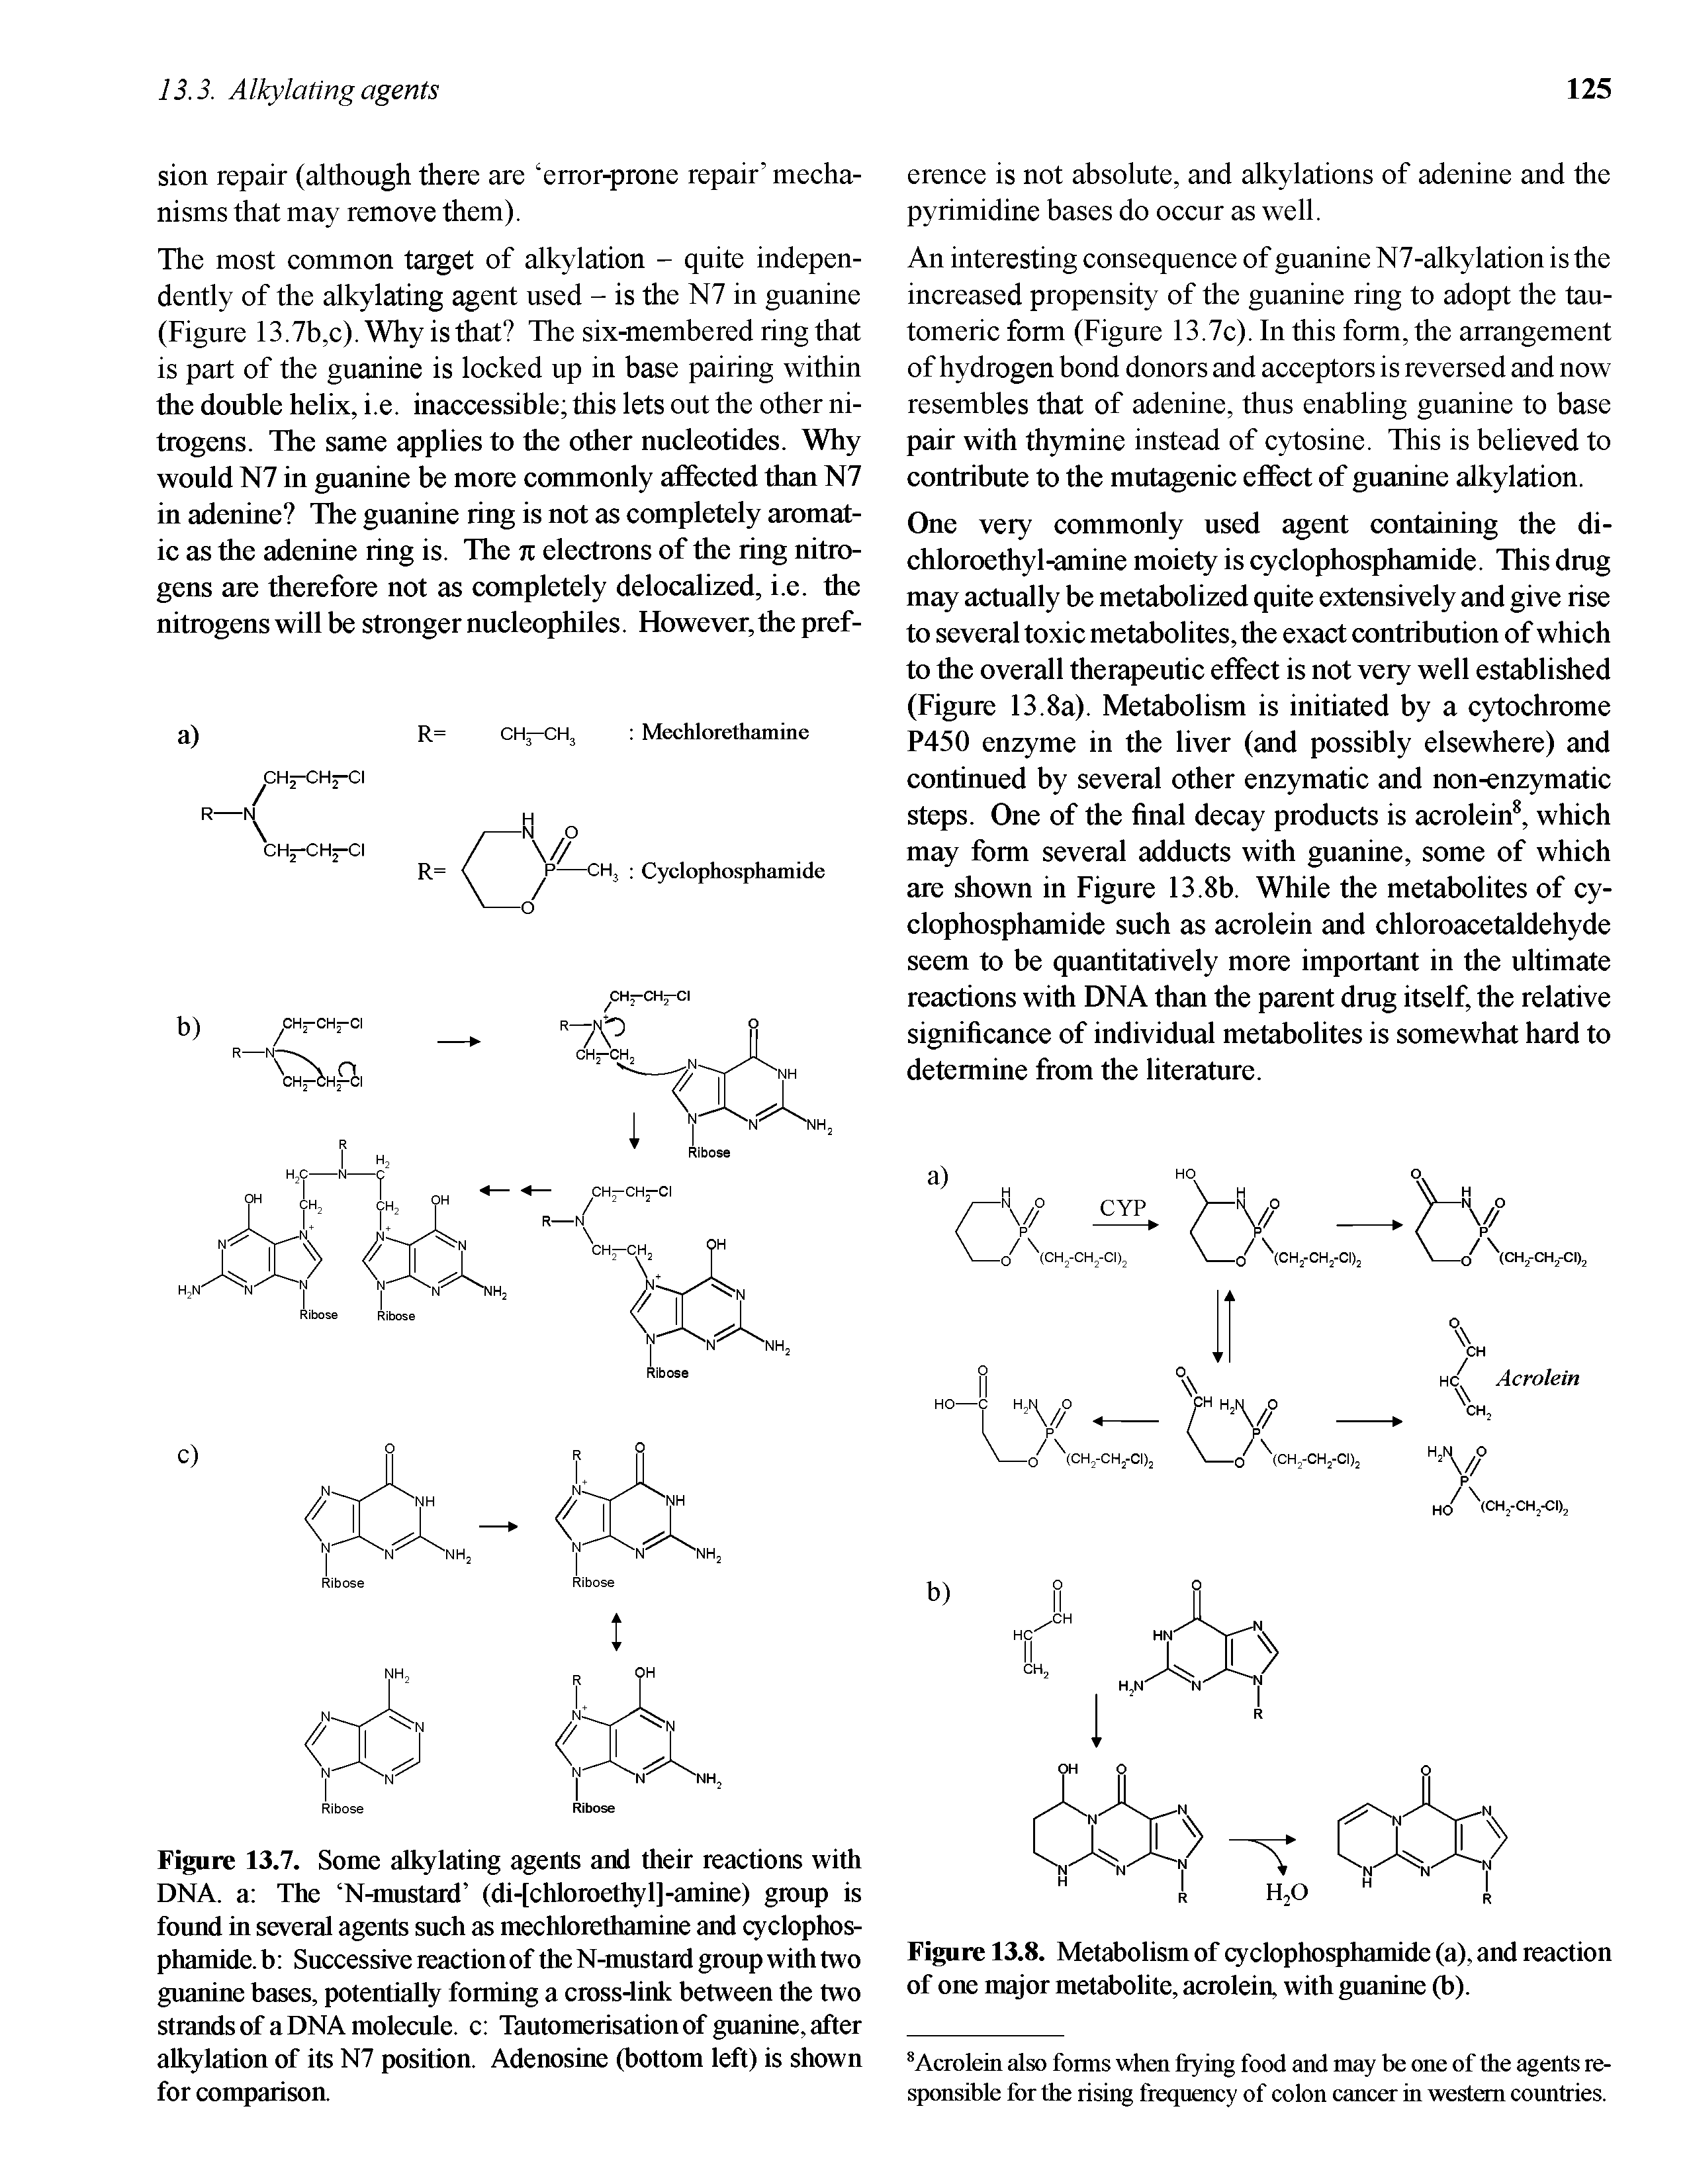 Figure 13.7. Some alkylating agents and their reactions with DNA. a The N-mustard (di-[chloroethyl]-amine) group is found in several agents such as mechlorethamine and cyclophosphamide. b Successive reaction of the N-mustard group with two guanine bases, potentially forming a cross-link between the two strands of a DNA molecule, c Tautomerisation of guanine, after alkylation of its N7 position. Adenosine (bottom left) is shown for comparison.